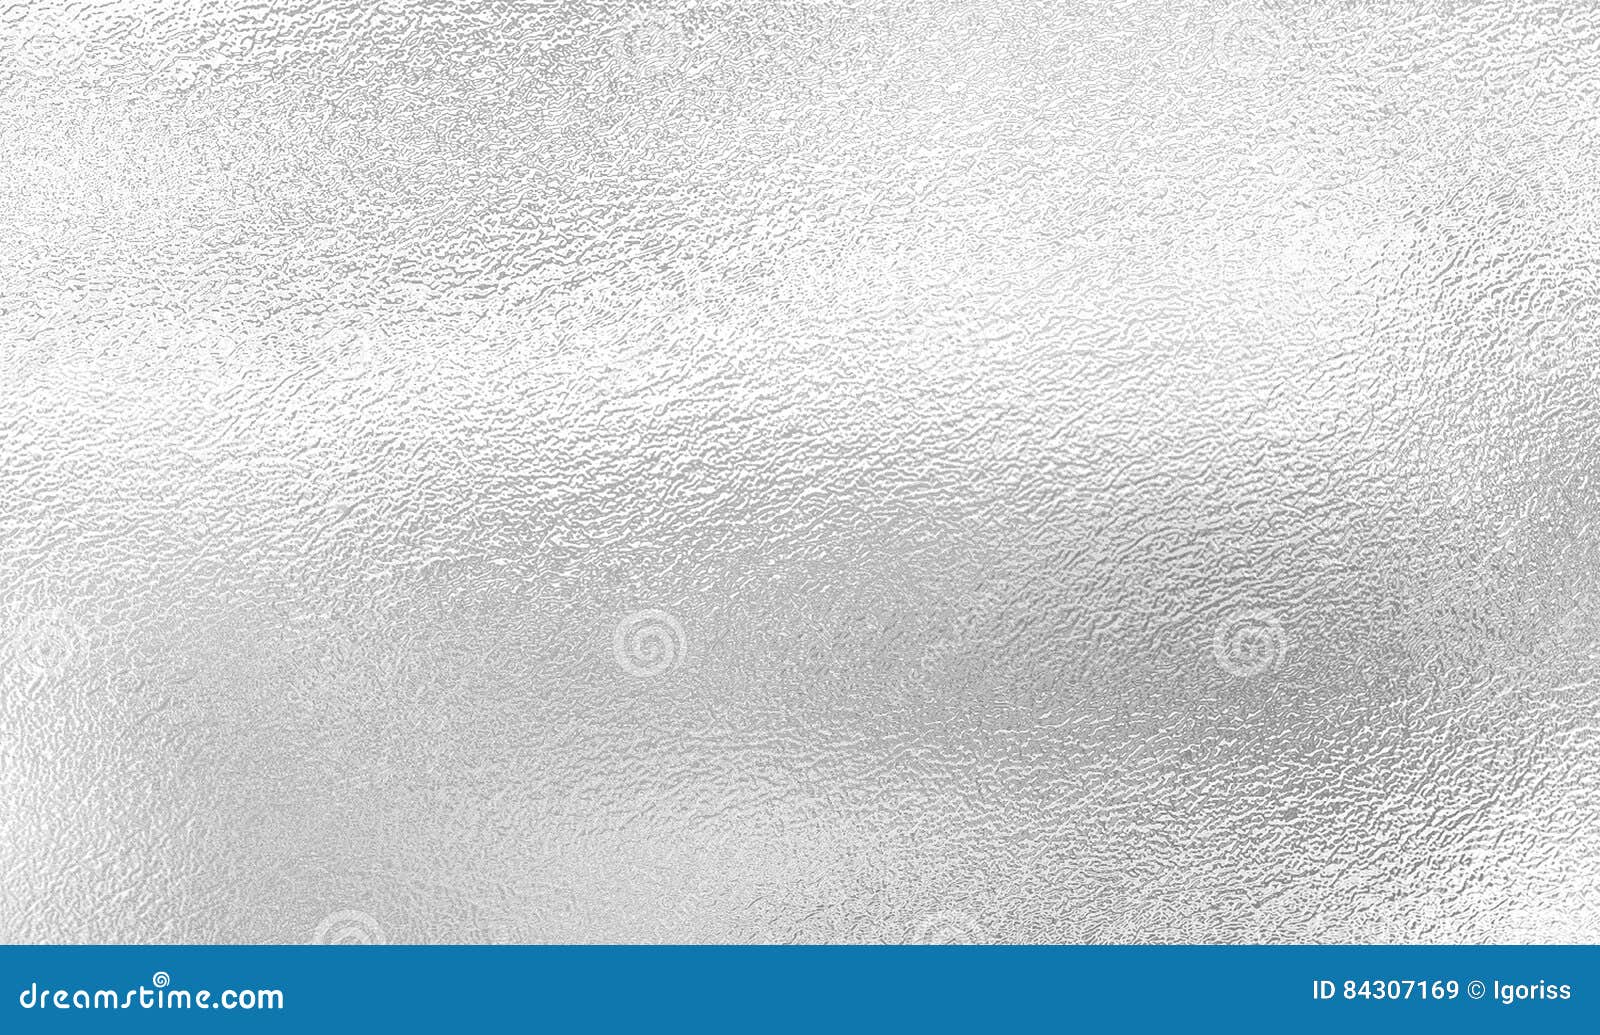 Silver Black Foil Texture Background Stock Photo - Download Image